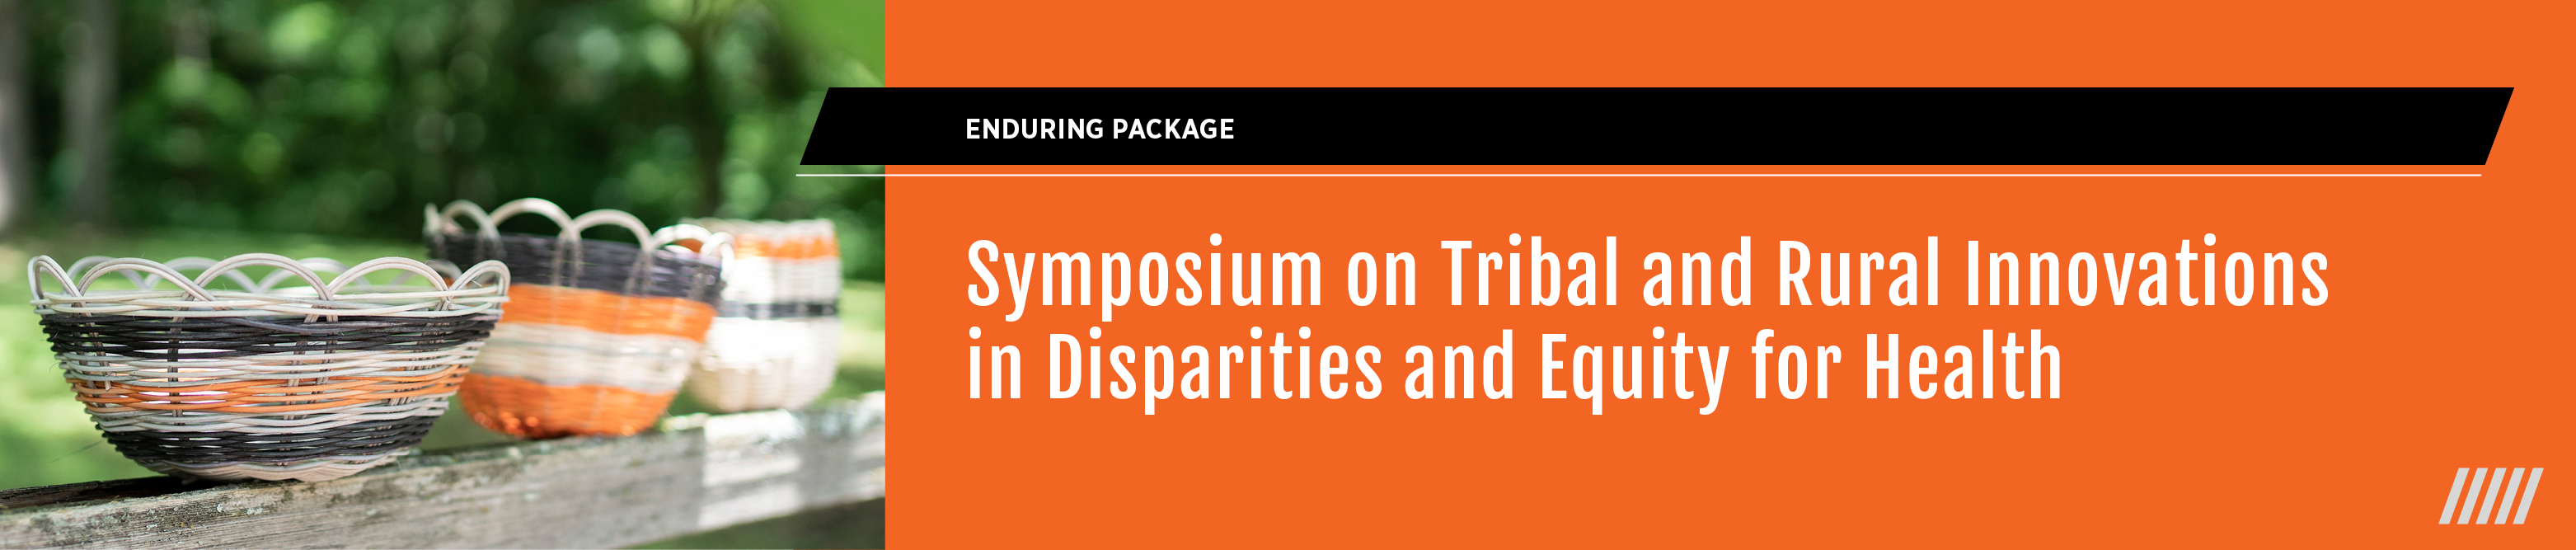 2022 Symposium on Tribal and Rural Innovation in Disparities and Equity for Health (STRIDE) - Enduring Package Banner